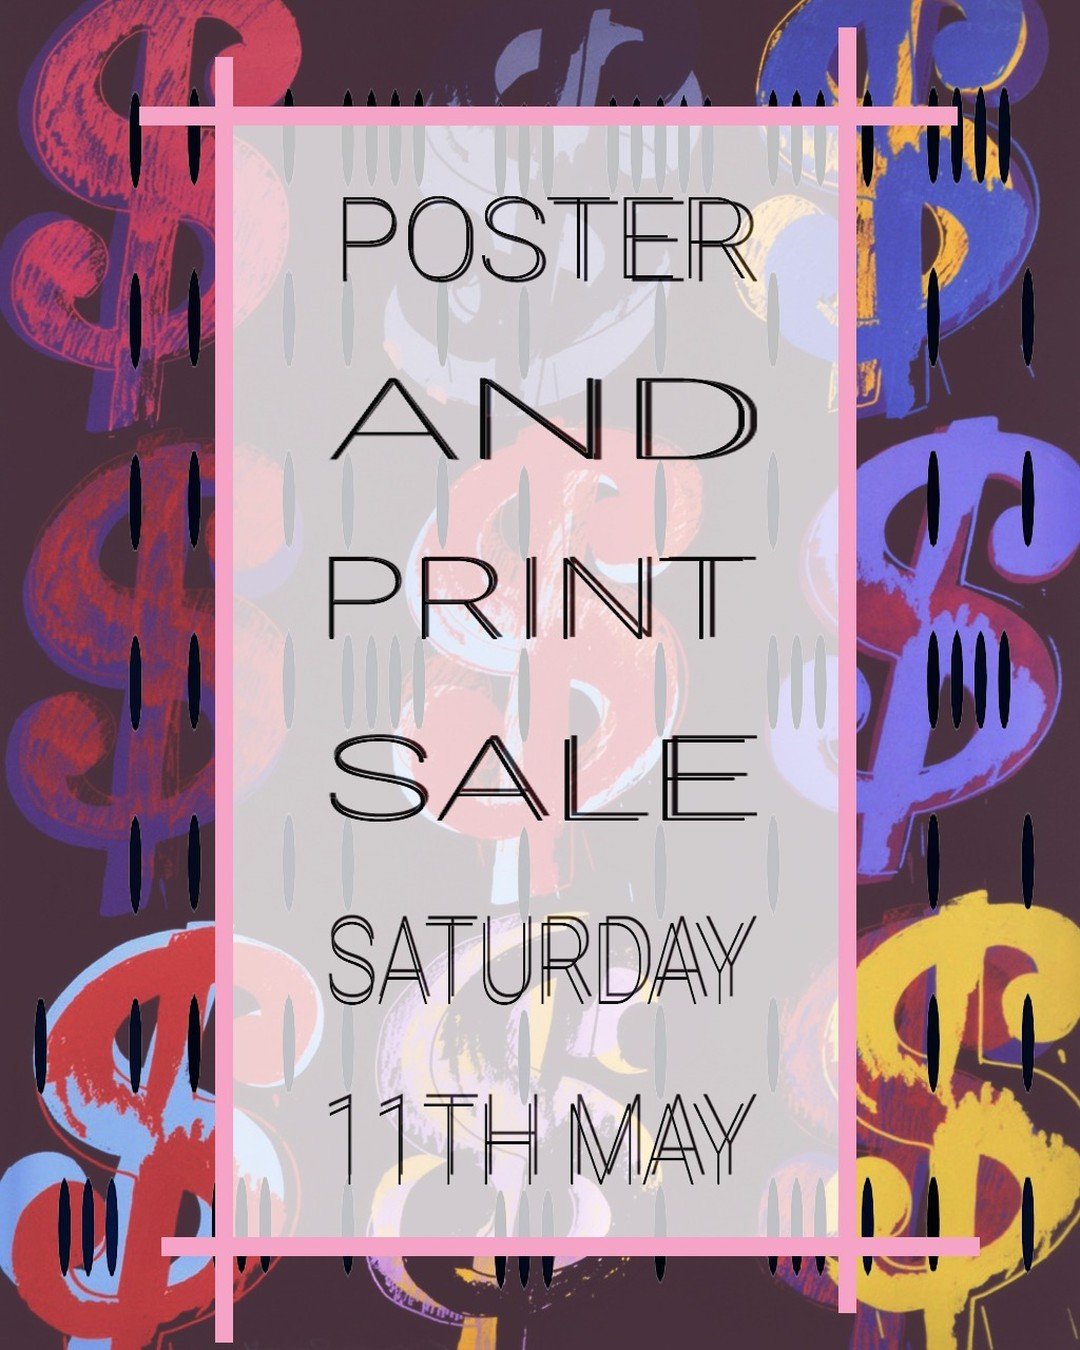 Grab a creative bargain - Jupiter is hosting a unique sale of original art exhibition posters and prints this Saturday including #warhol #cristo #miro #hockney #chagall #matisse #rebeccahorn